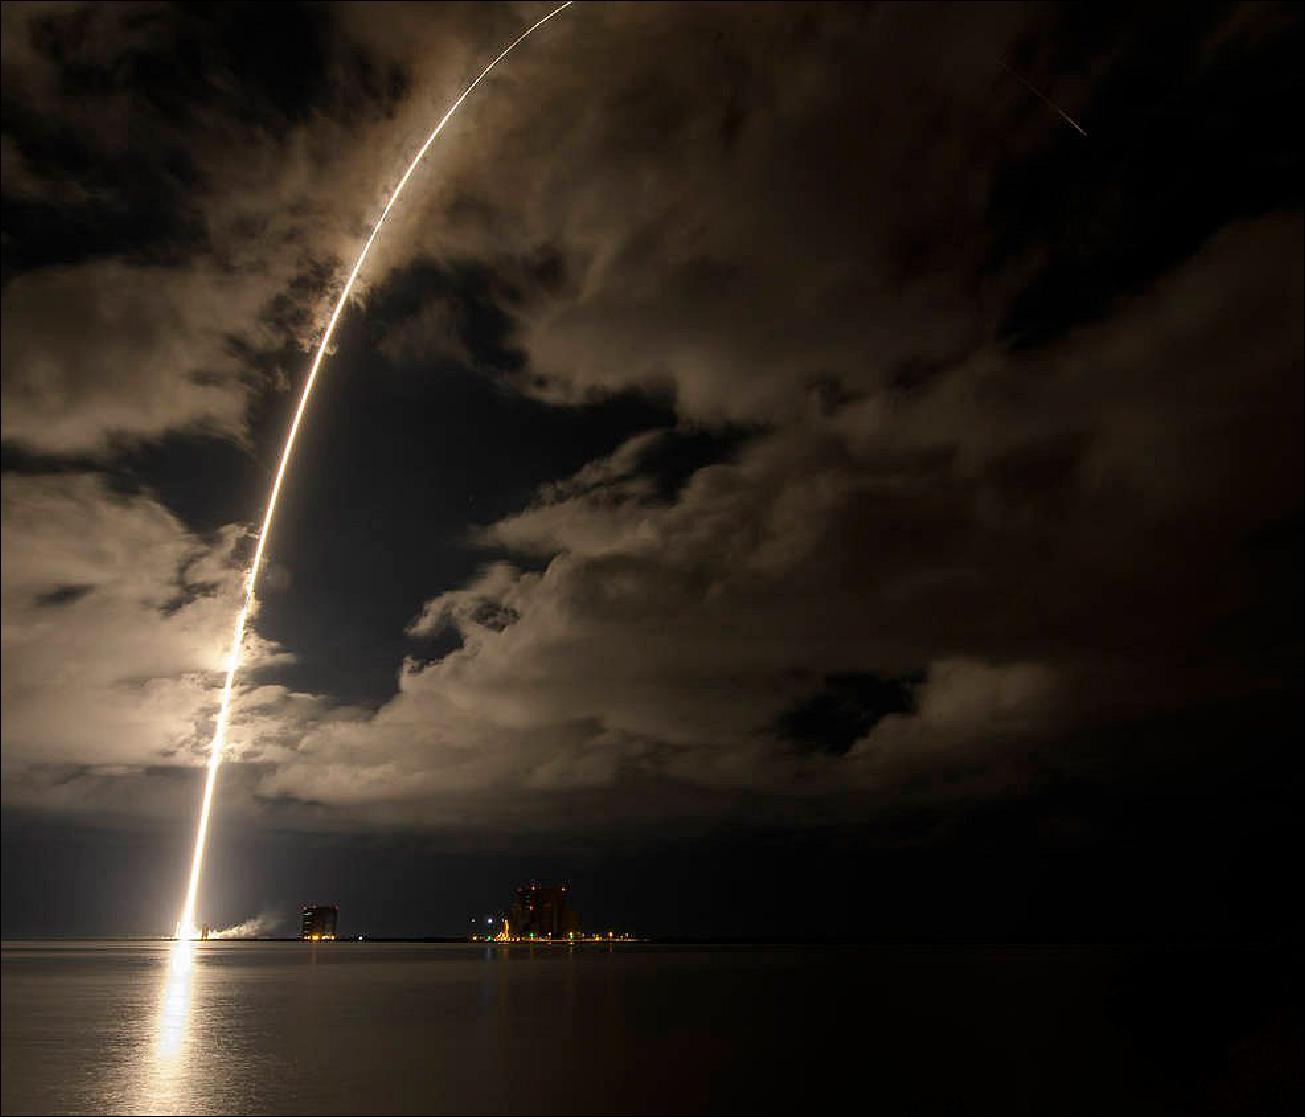 Figure 20: A United Launch Alliance Atlas V rocket with the Lucy spacecraft aboard is seen in this 2 minute and 30 second exposure photograph as it launches from Space Launch Complex 41, Saturday, Oct. 16, 2021, at Cape Canaveral Space Force Station in Florida. Lucy will be the first spacecraft to study Jupiter's Trojan Asteroids. Like the mission's namesake – the fossilized human ancestor, "Lucy," whose skeleton provided unique insight into humanity's evolution – Lucy will revolutionize our knowledge of planetary origins and the formation of the solar system (image credits: NASA, Bill Ingalls)